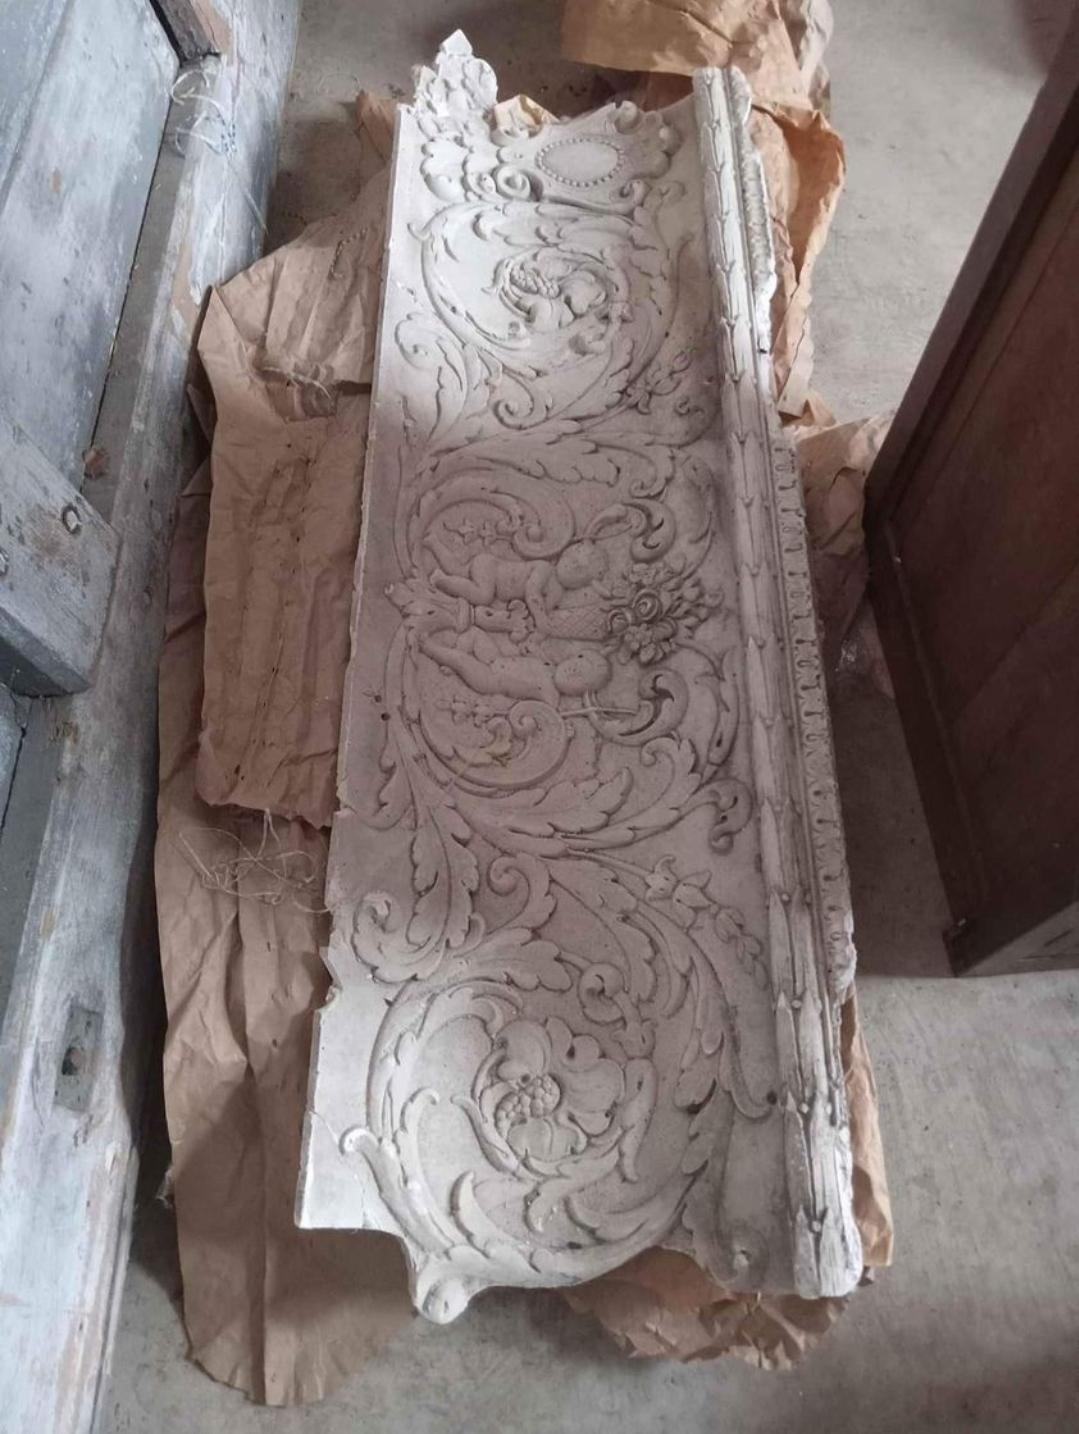 Came out of a building in Waco Texas. 
3 four foot bas relief rococo crown molding pieces. 
Interlocking. 
More thelan 100 years old.
Intricately detailed.
You can still see the faces and bodies of the cherubs clearly. 
Beautiful scrollwork.